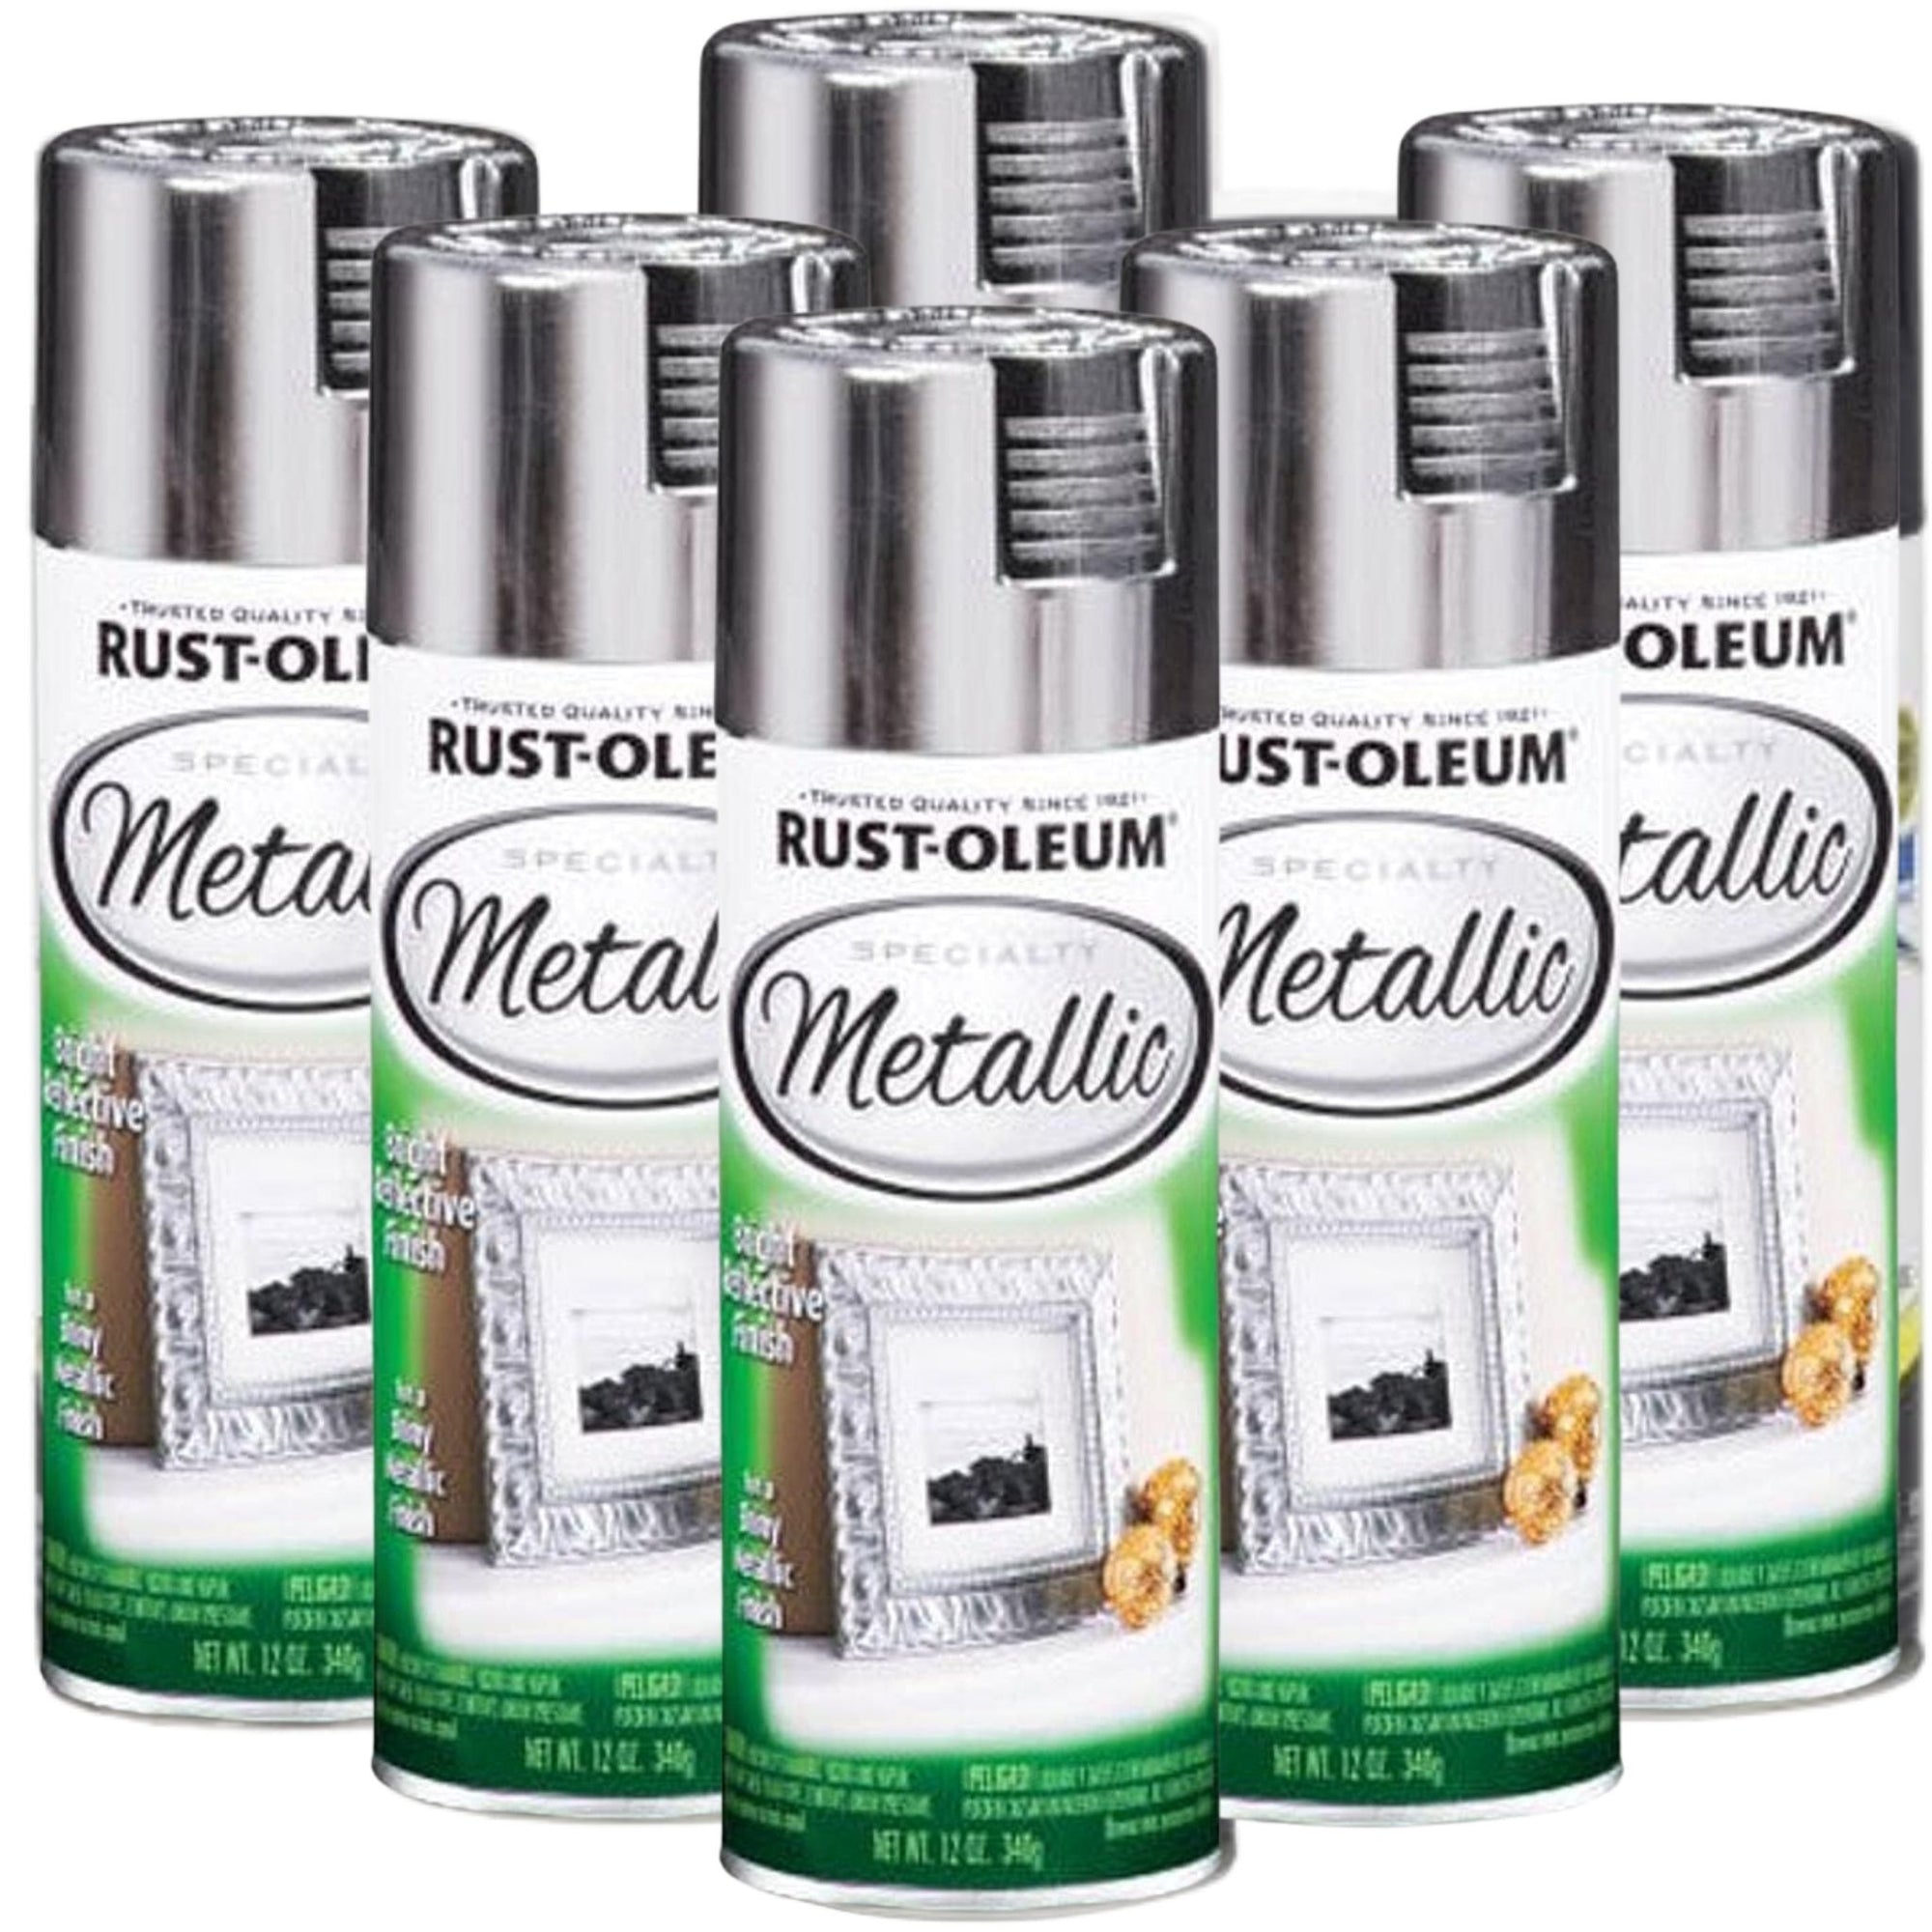 6 Cans | Rust-Oleum Speciality Metallic Bright Reflective Finish - 312g Spray | 1915830 METALLIC SILVER - South East Clearance Centre